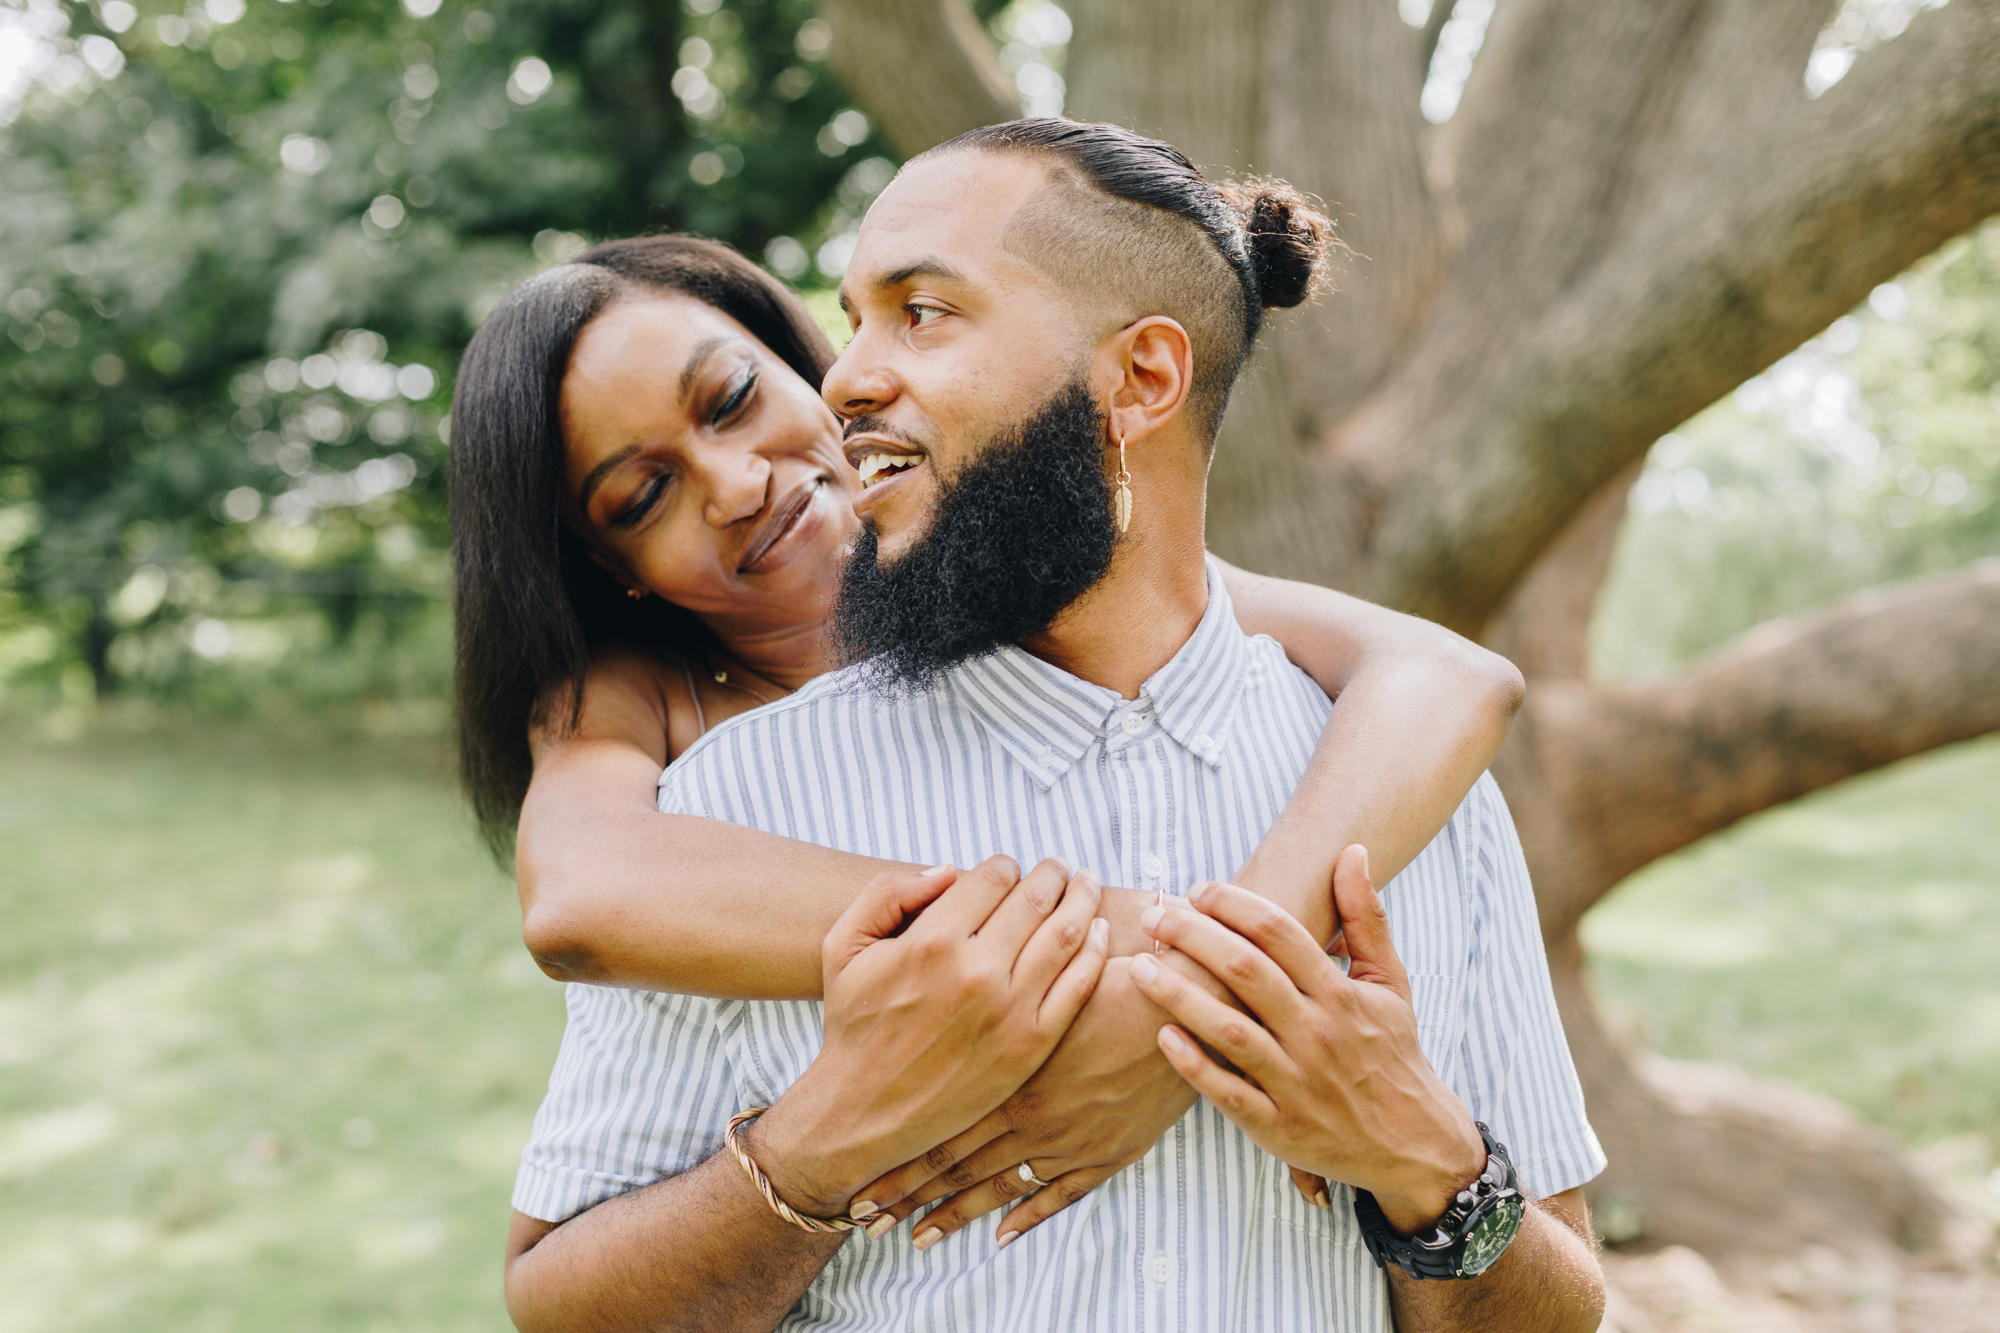 Picture-Perfect Summer Prospect Park Engagement Photography